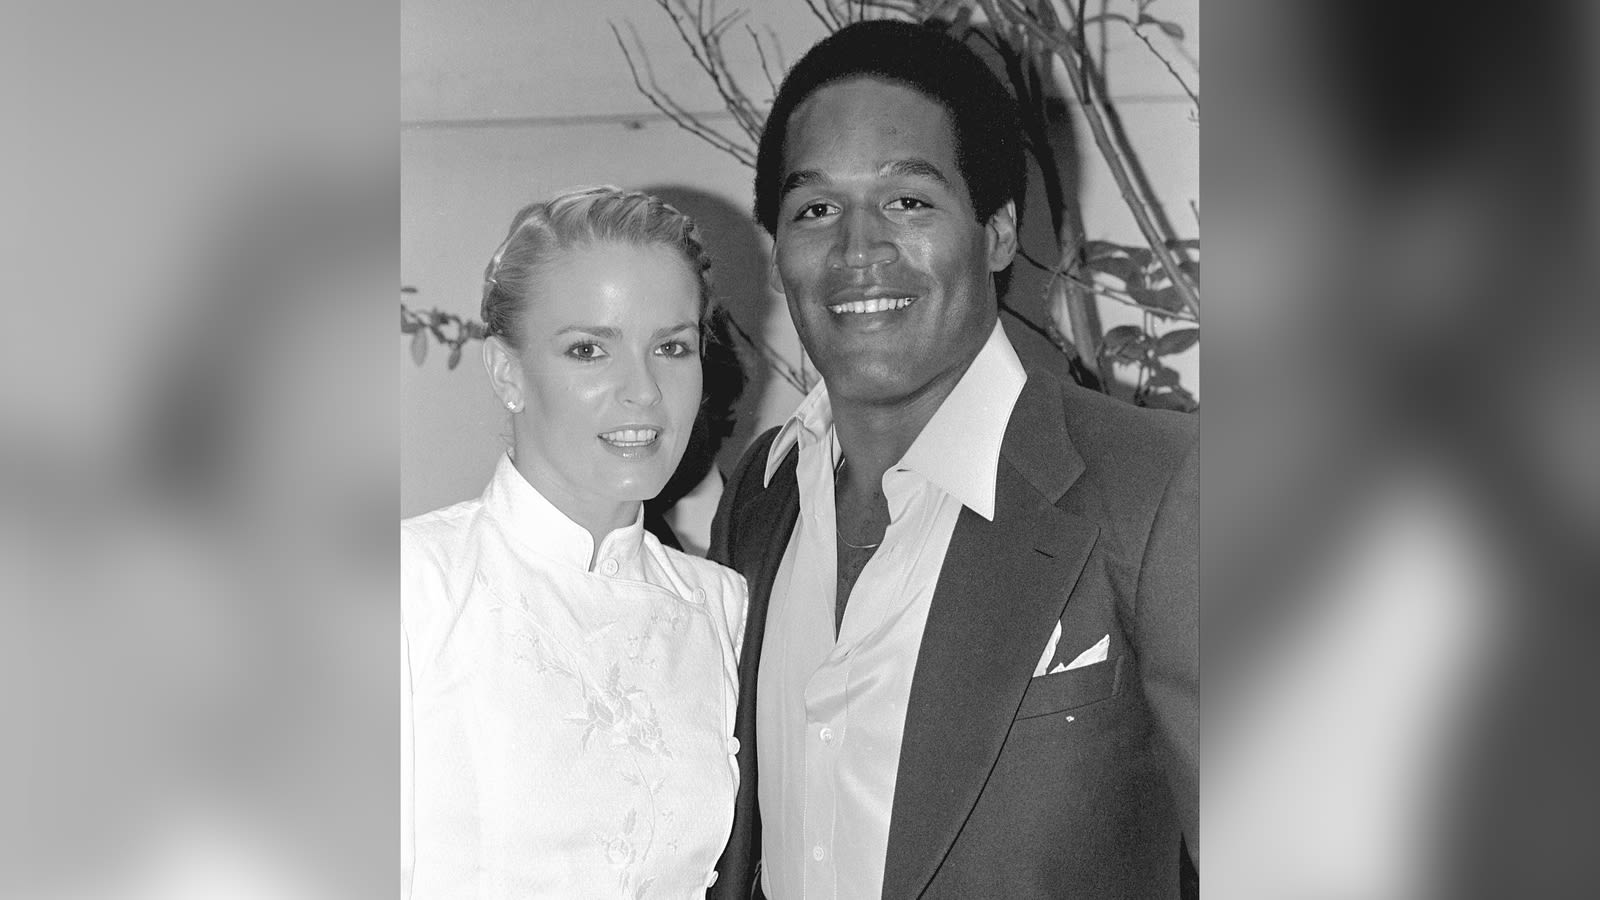 Nicole Brown Simpson's sisters share 'complicated' reaction to OJ Simpson's death